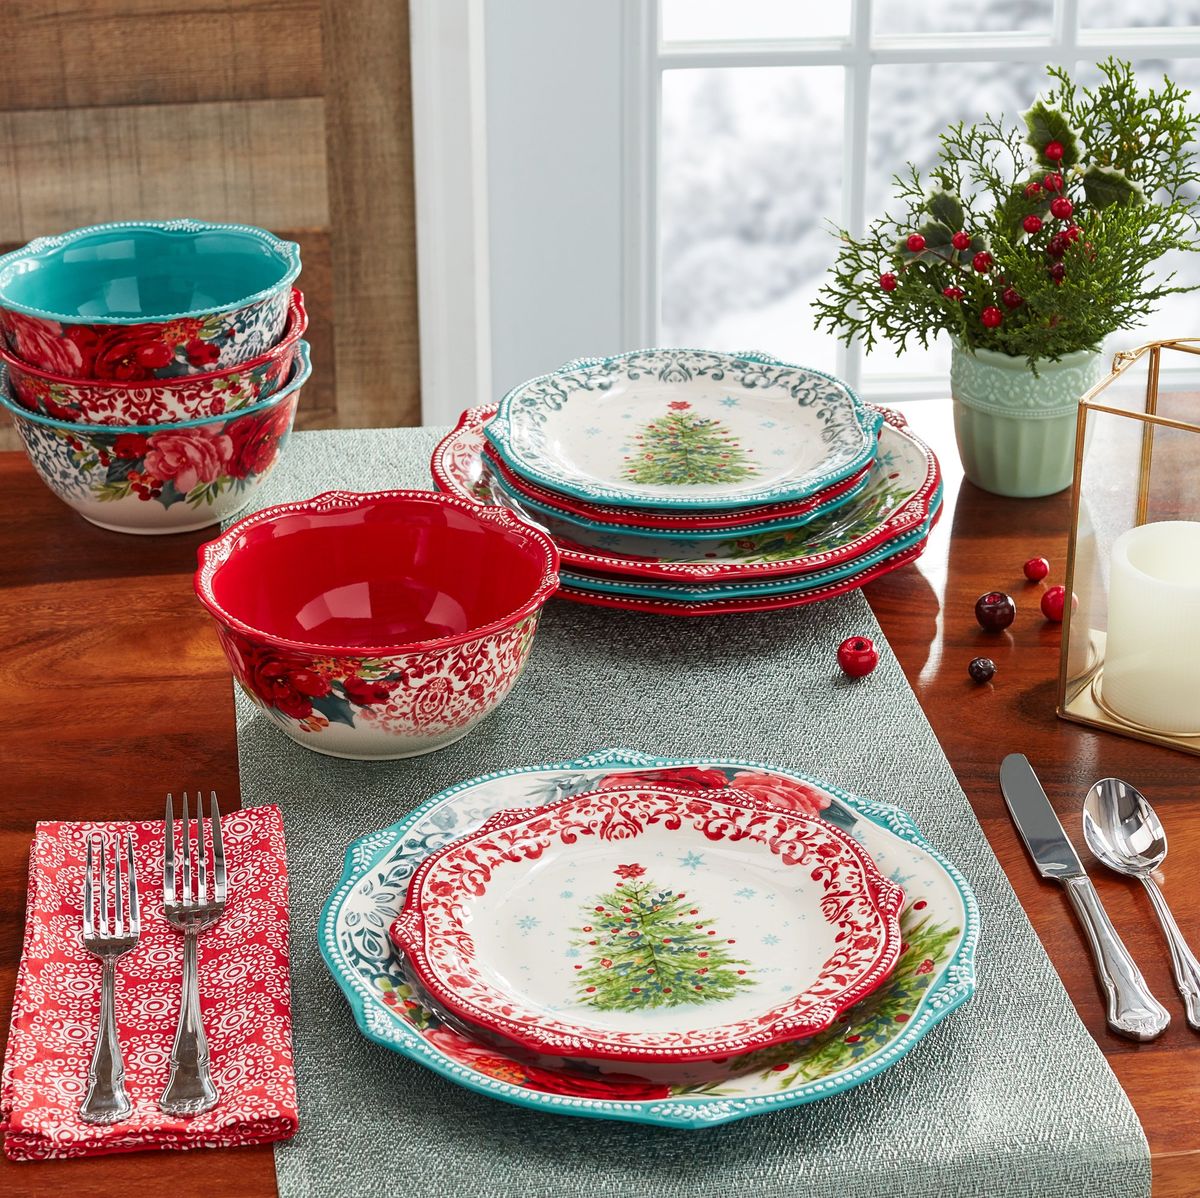 https://hips.hearstapps.com/hmg-prod/images/the-pioneer-woman-holiday-dinnerware-set-1639414662.jpeg?crop=1.00xw:0.998xh;0,0&resize=1200:*